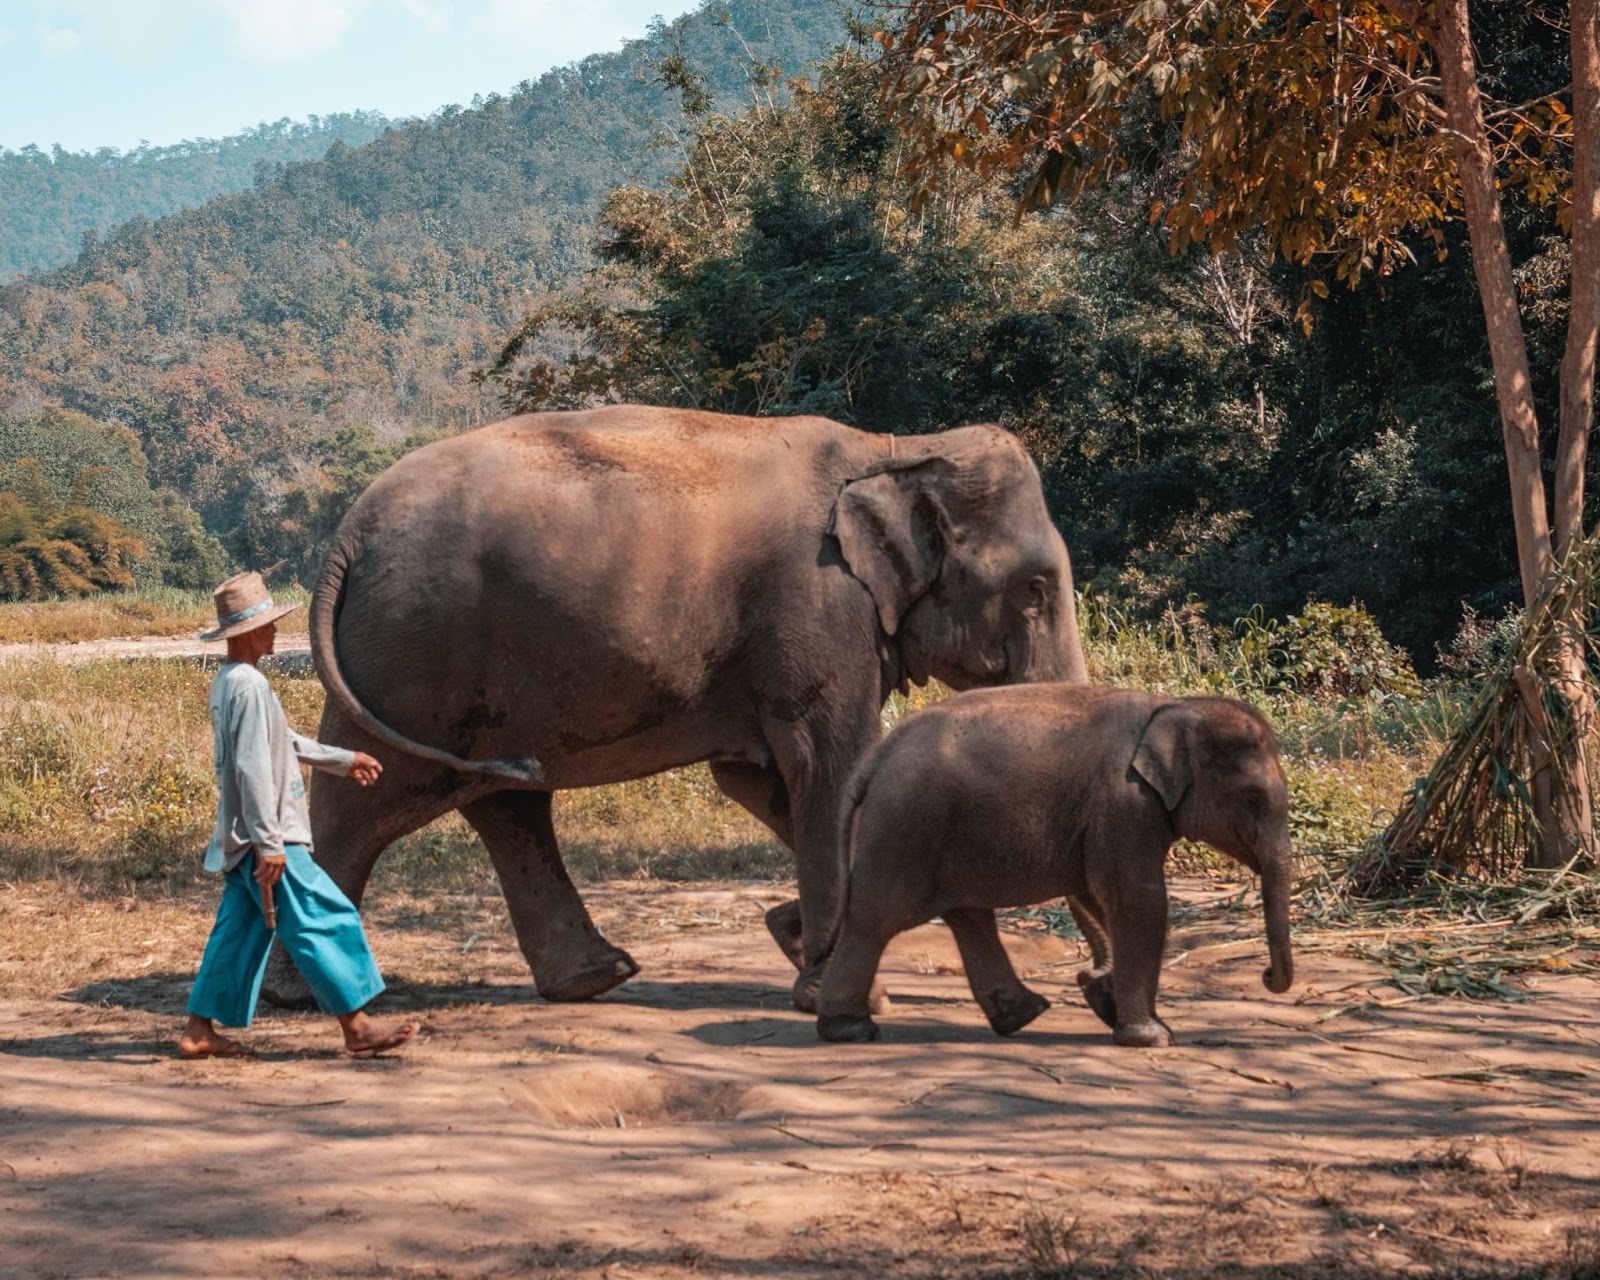 Farmers and their elephants living in Chiang Mai